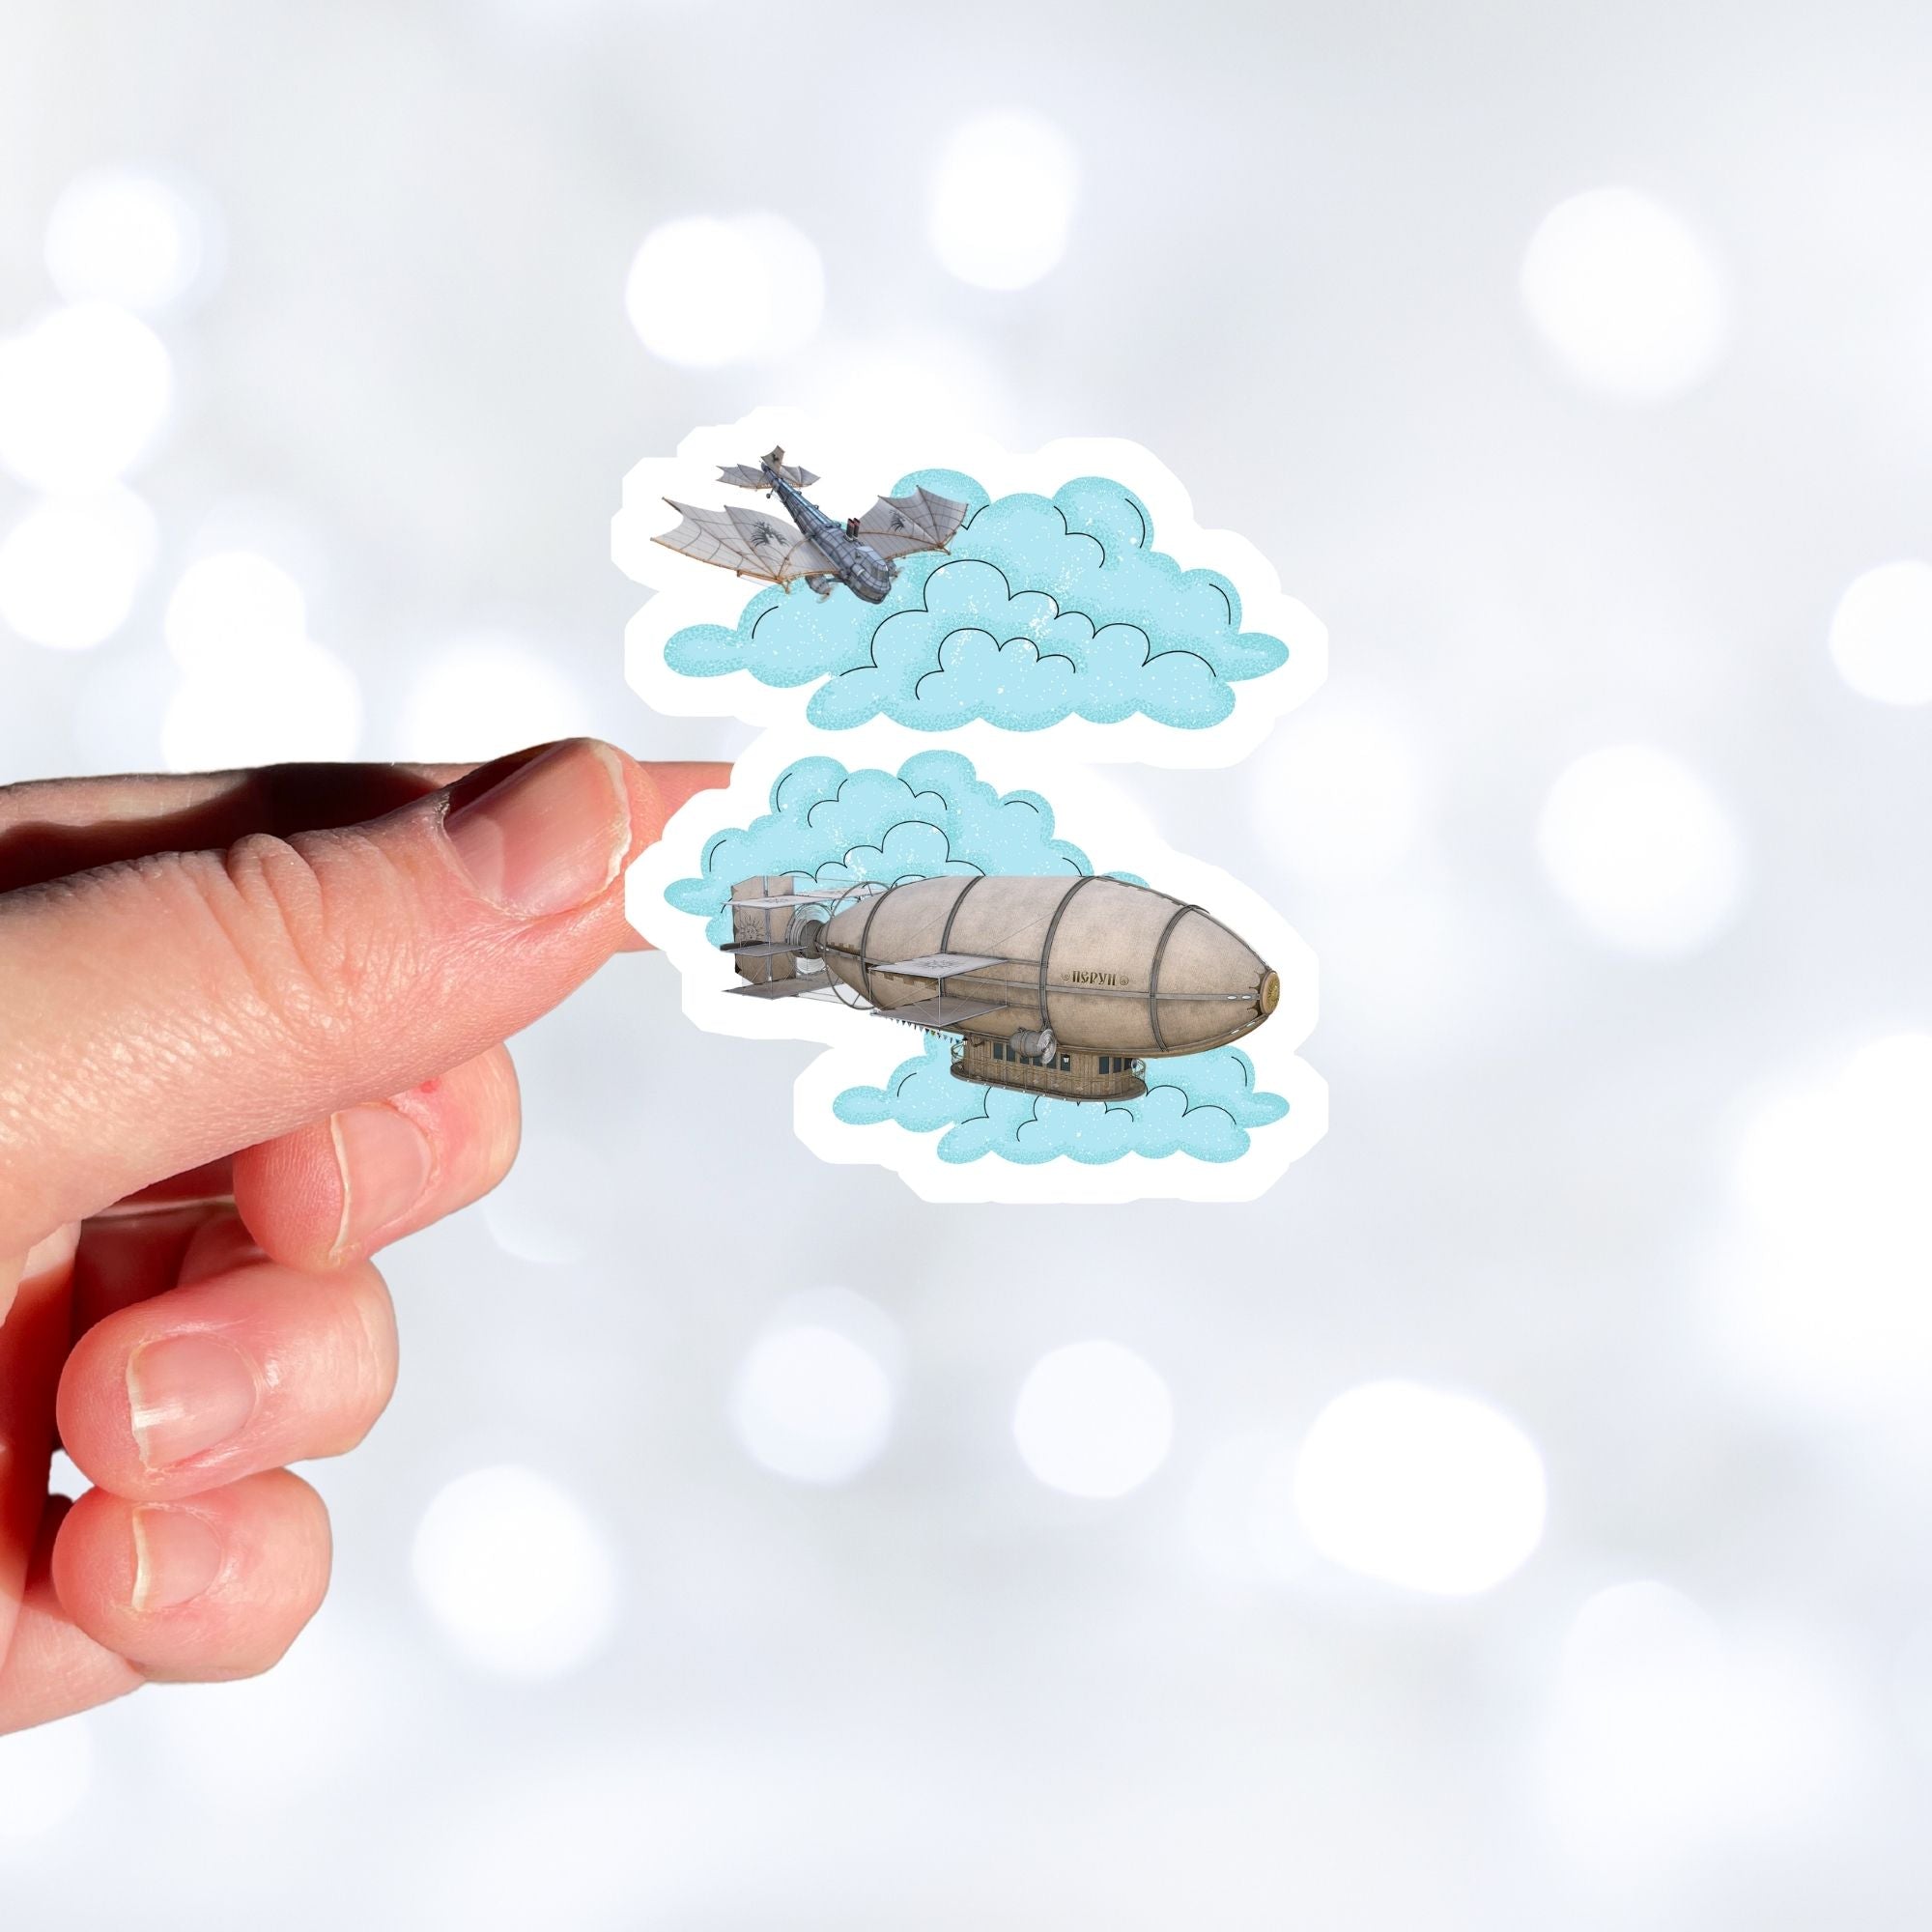 Is it a battle in the sky or is the plane coming to help out the blimp? This individual die-cut steampunk sticker features a steampunk plane diving through the clouds towards a steampunk dirigible. This image shows a hand holding the steampunk flyers sticker.